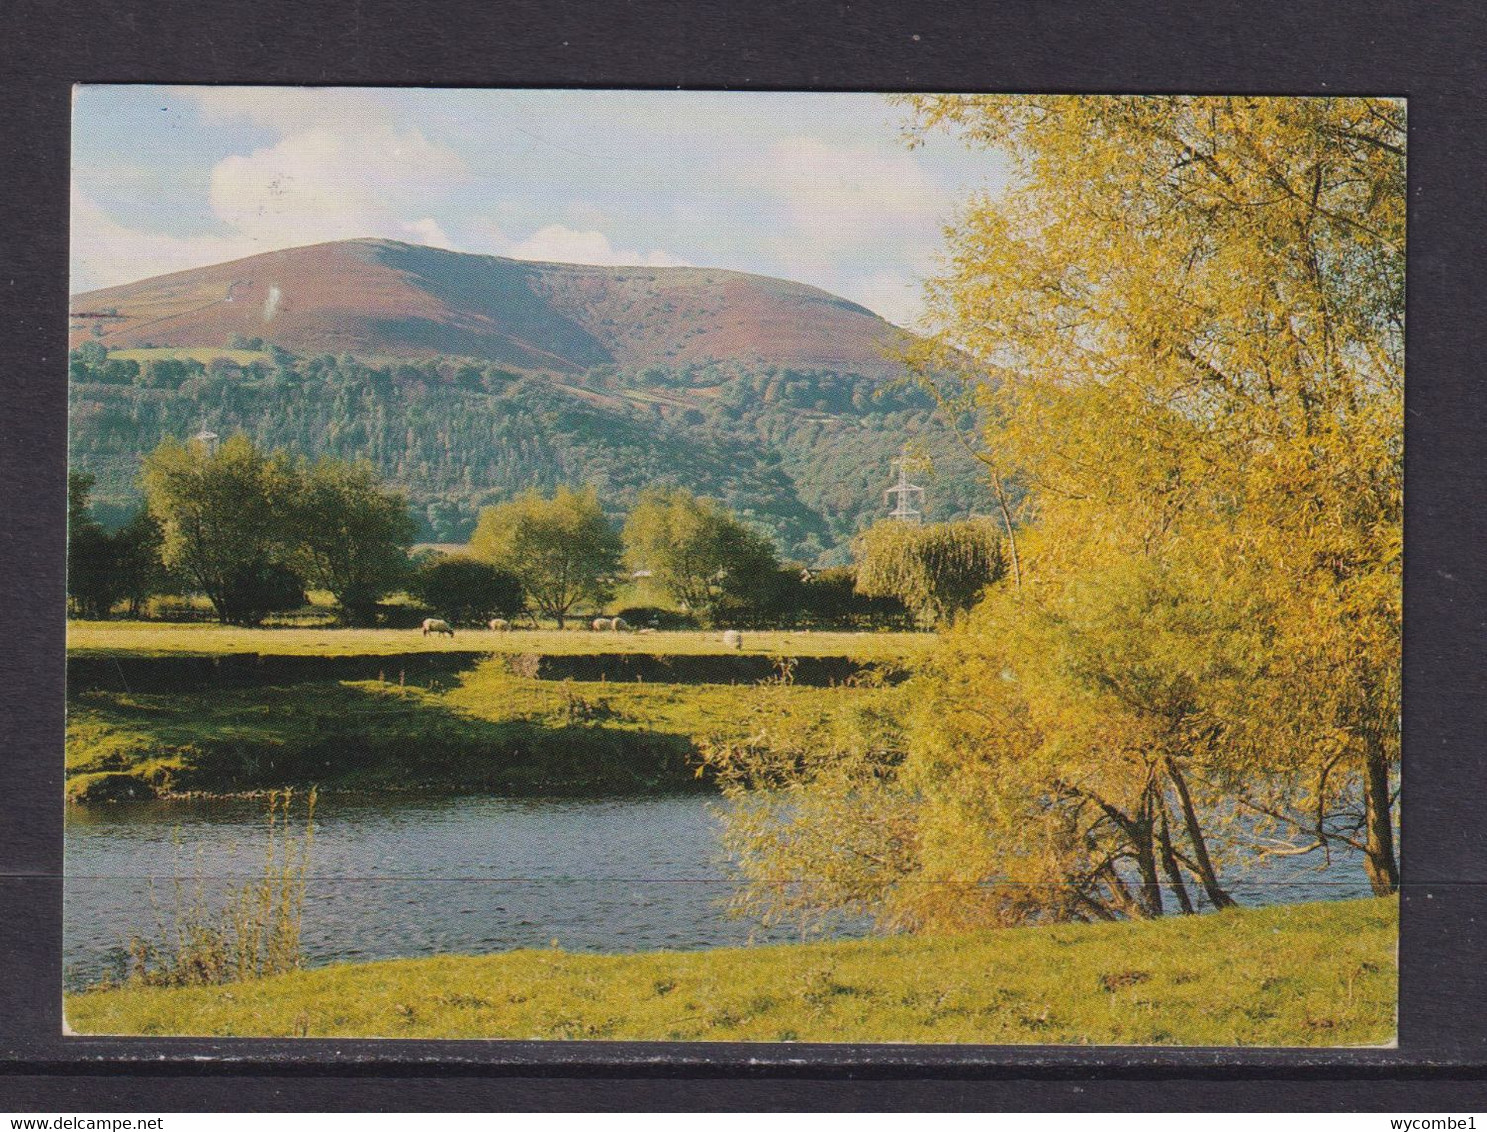 WALES - Abergavenny Blorenge And River Usk Used Postcard As Scans - Monmouthshire